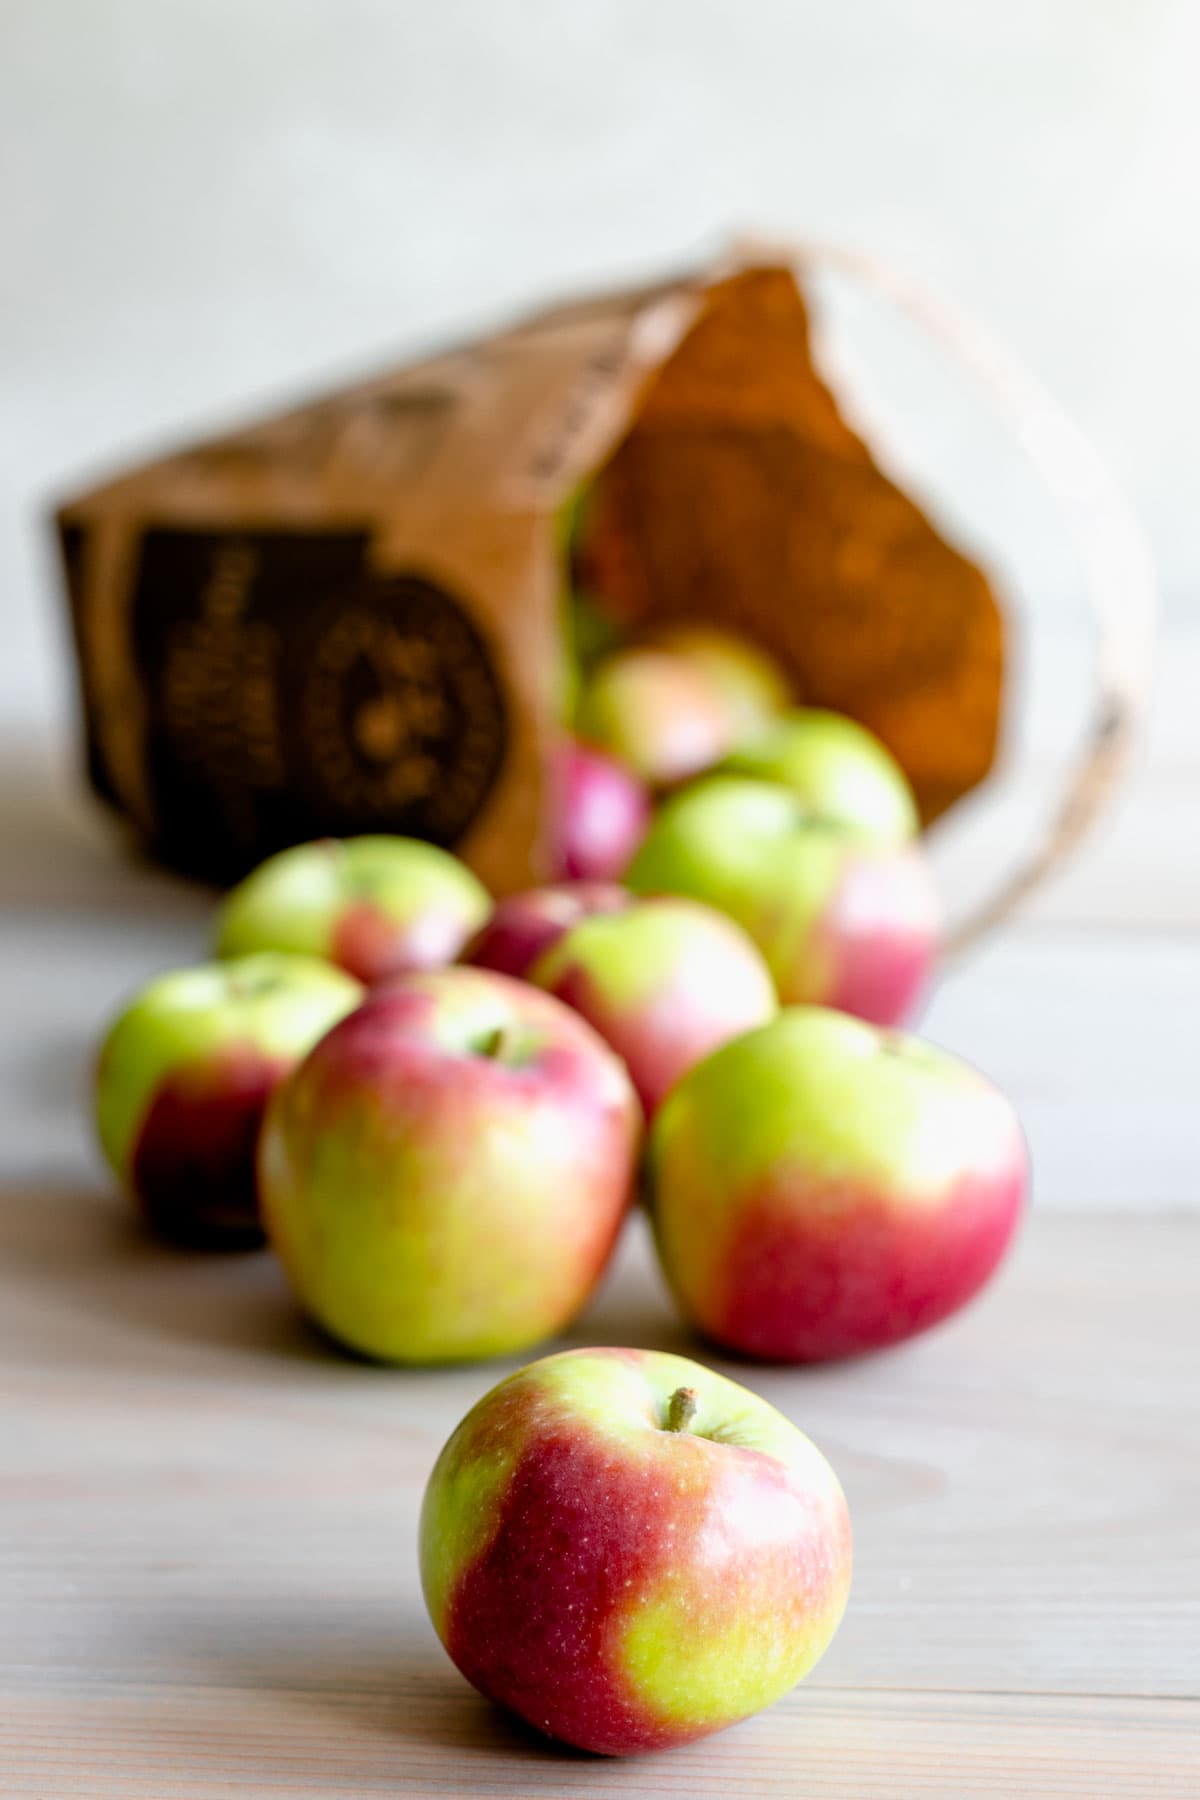 a 1/2 peck tote bag with apples